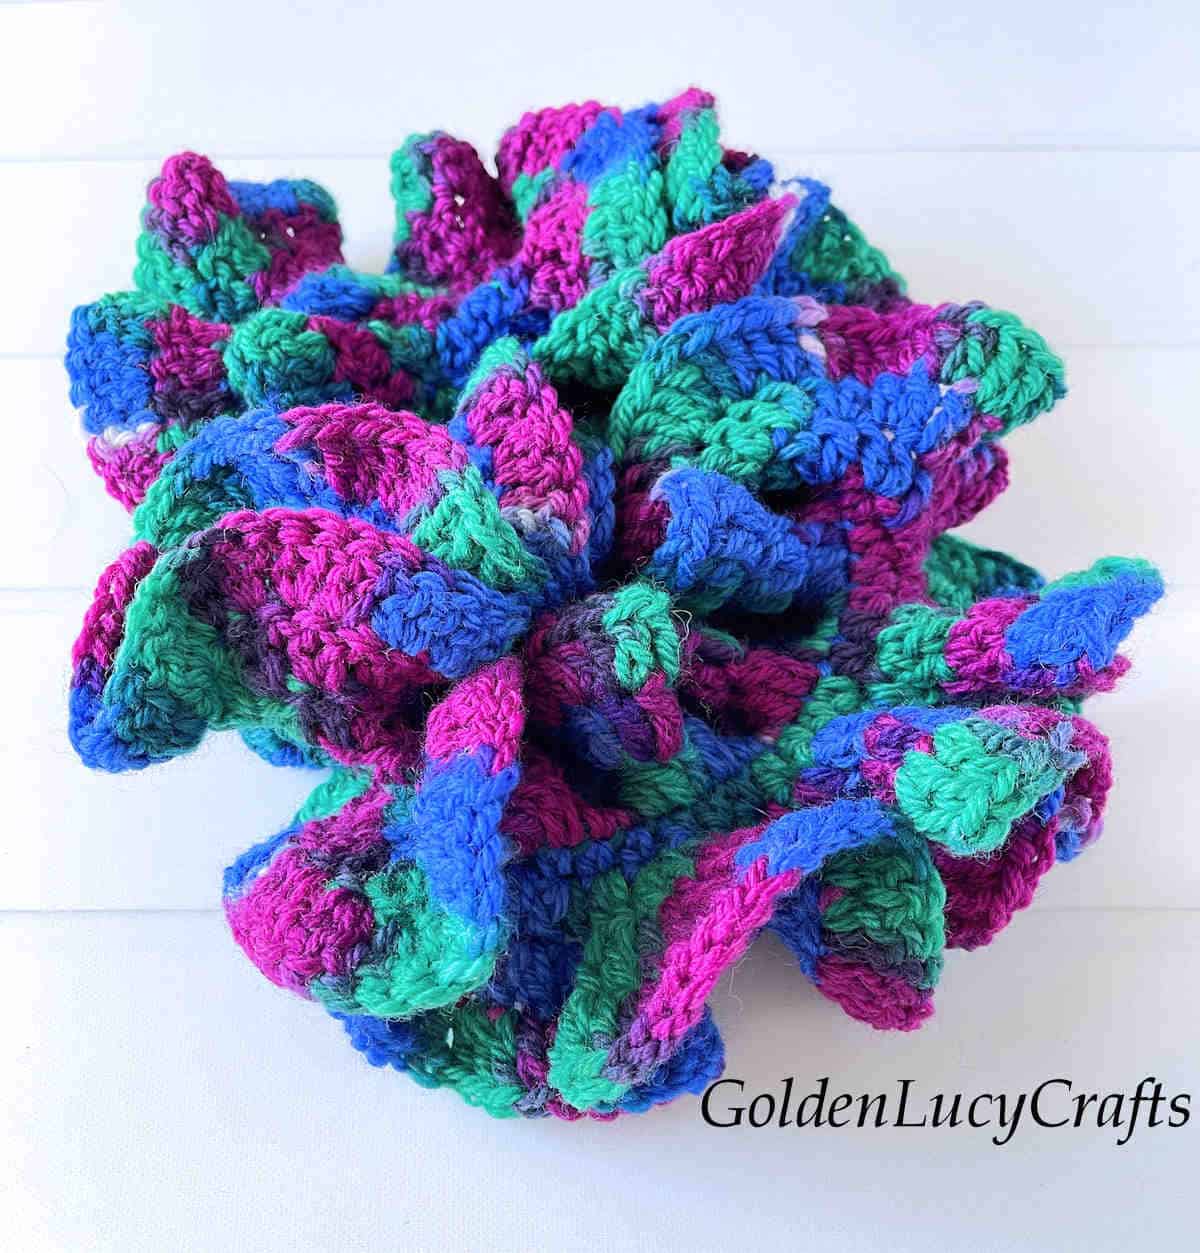 Colorful hyperbolic coral.